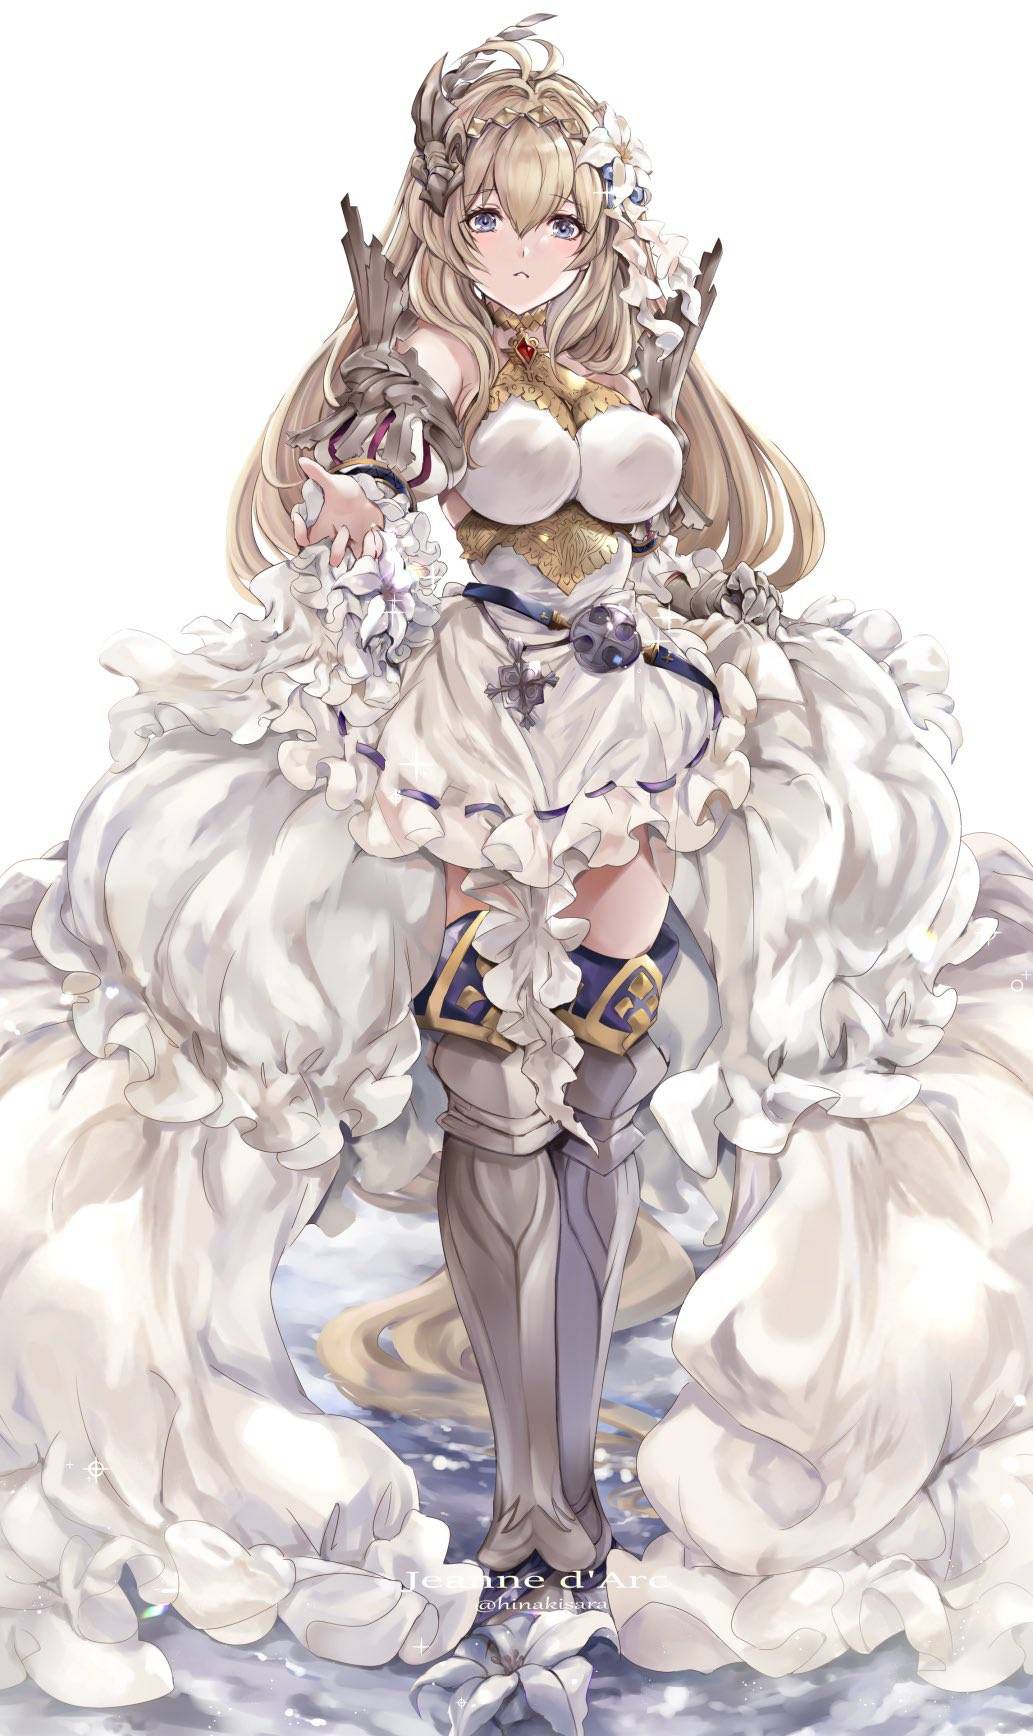 Jeanne Darc's free erotic image summary that makes you happy just by looking at it! (Granblue Fantasy) 6